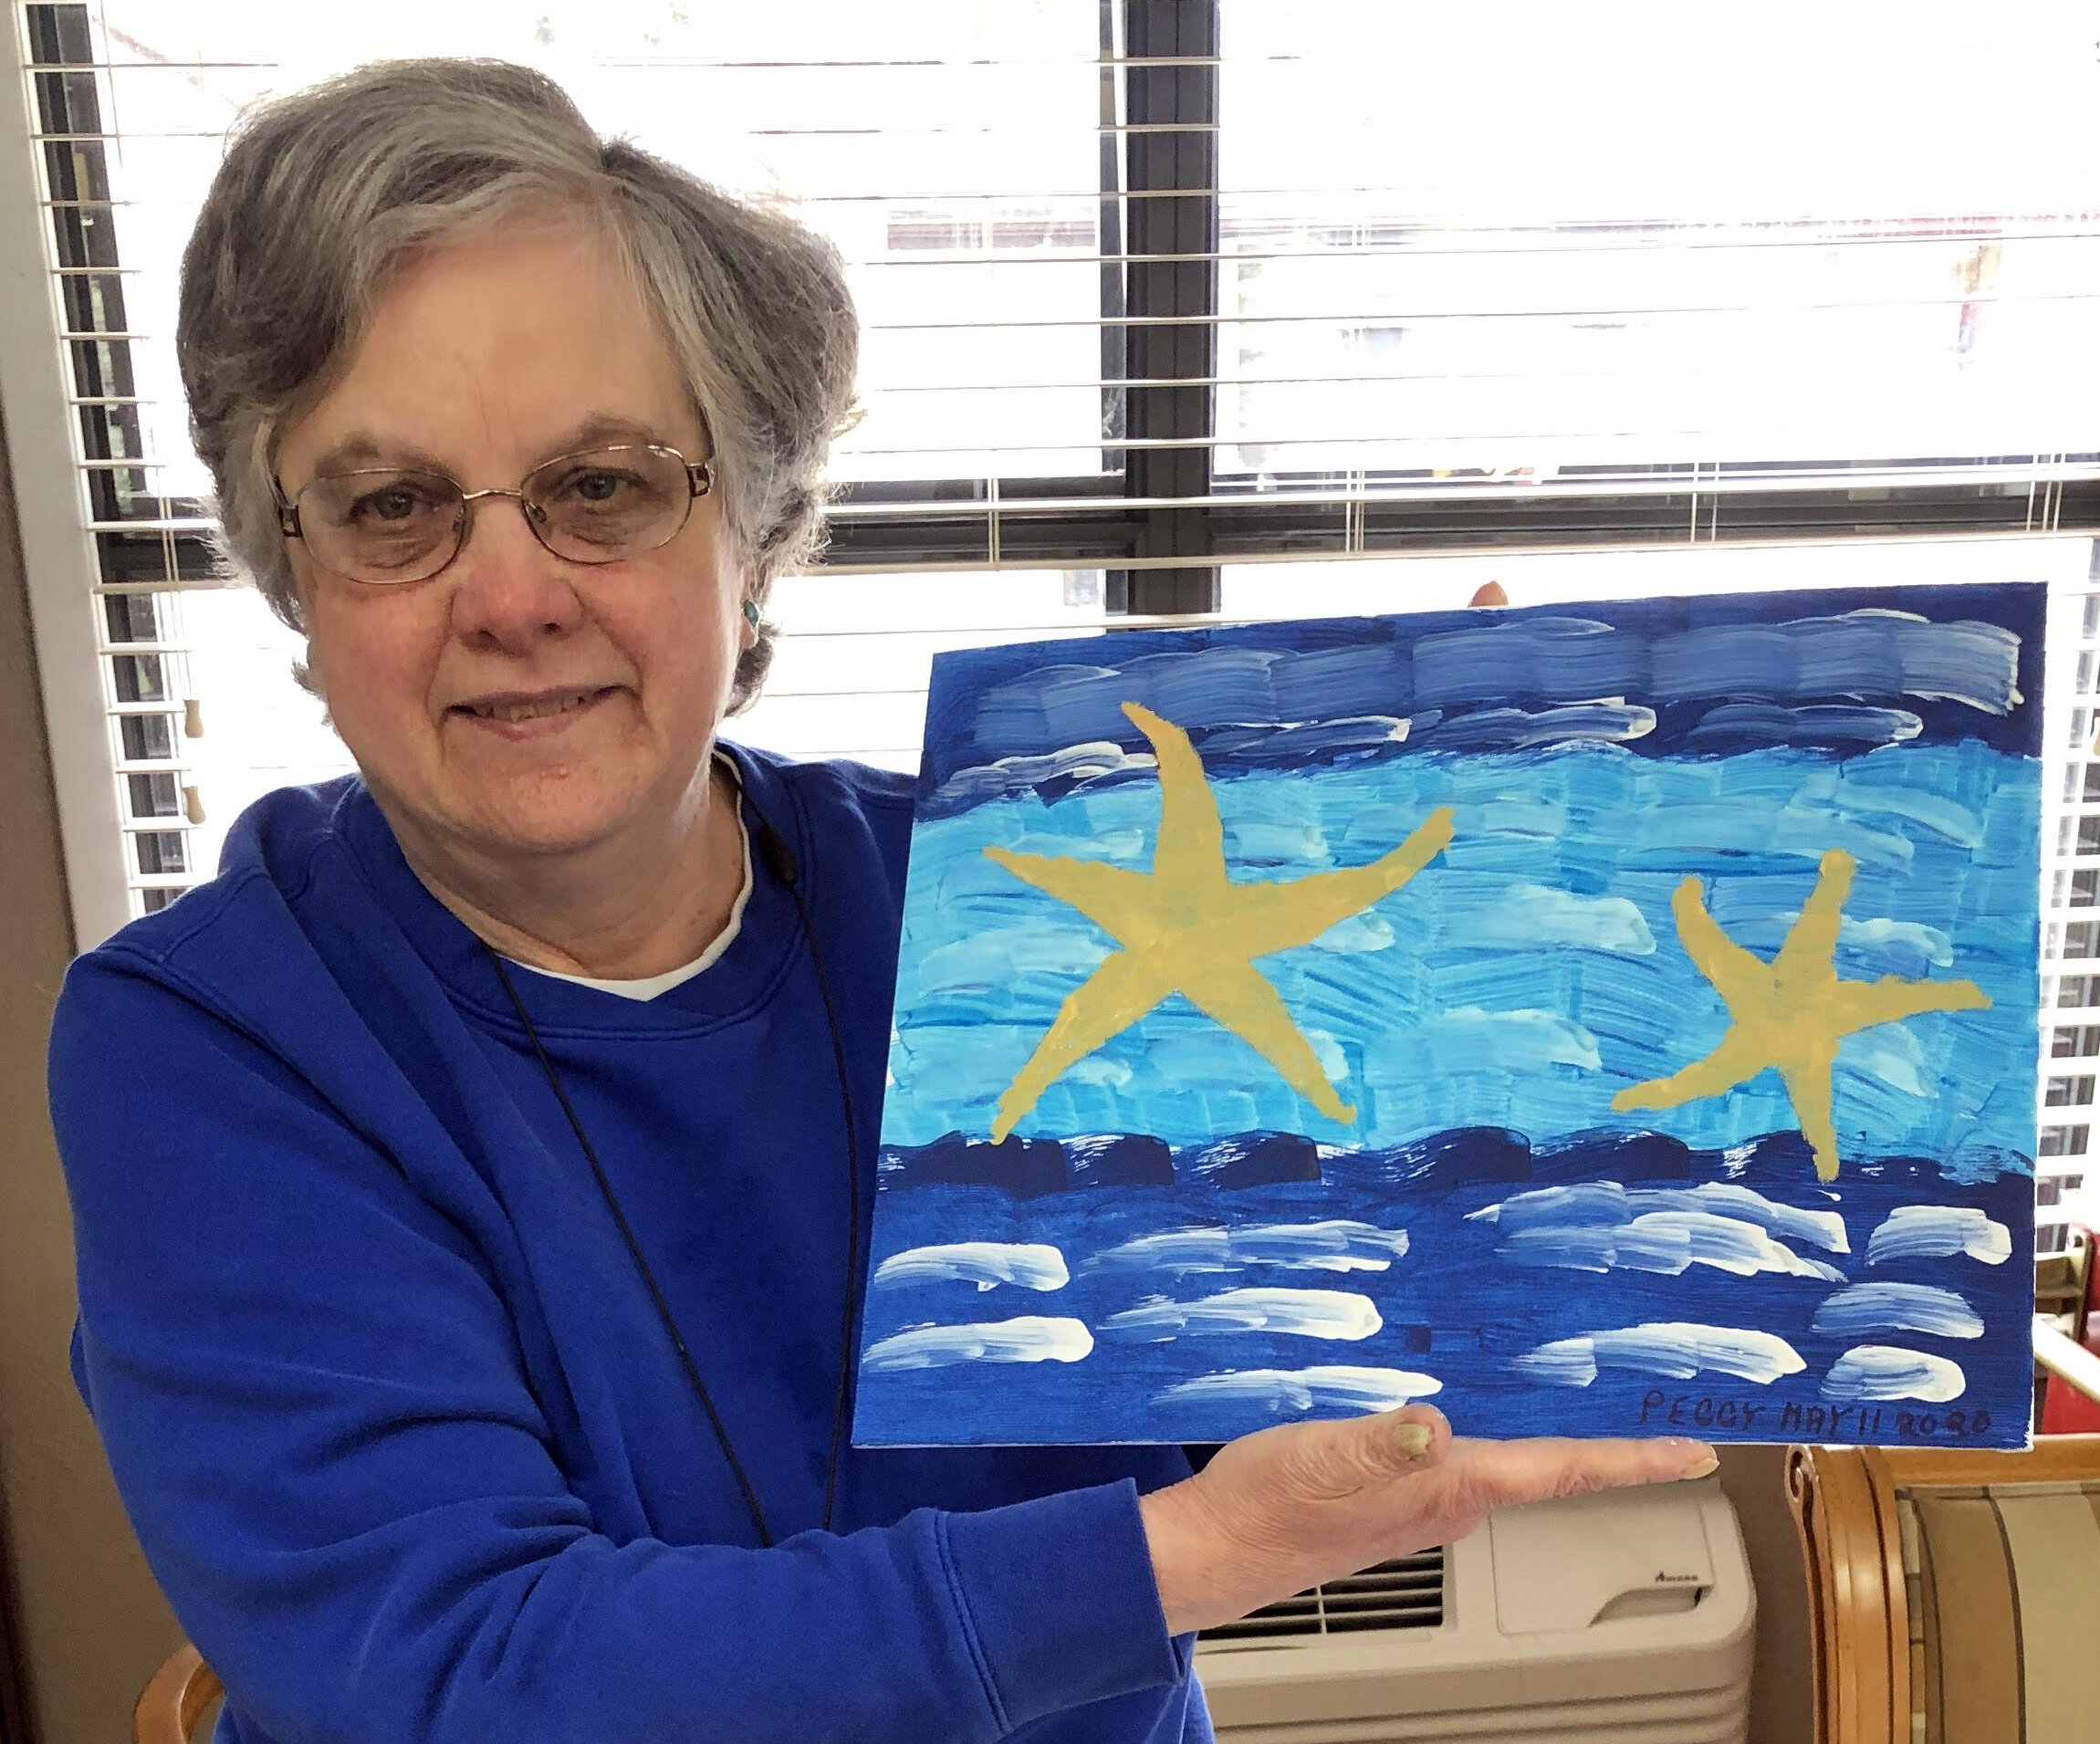 Springfield Assisted Living - Painting Activity